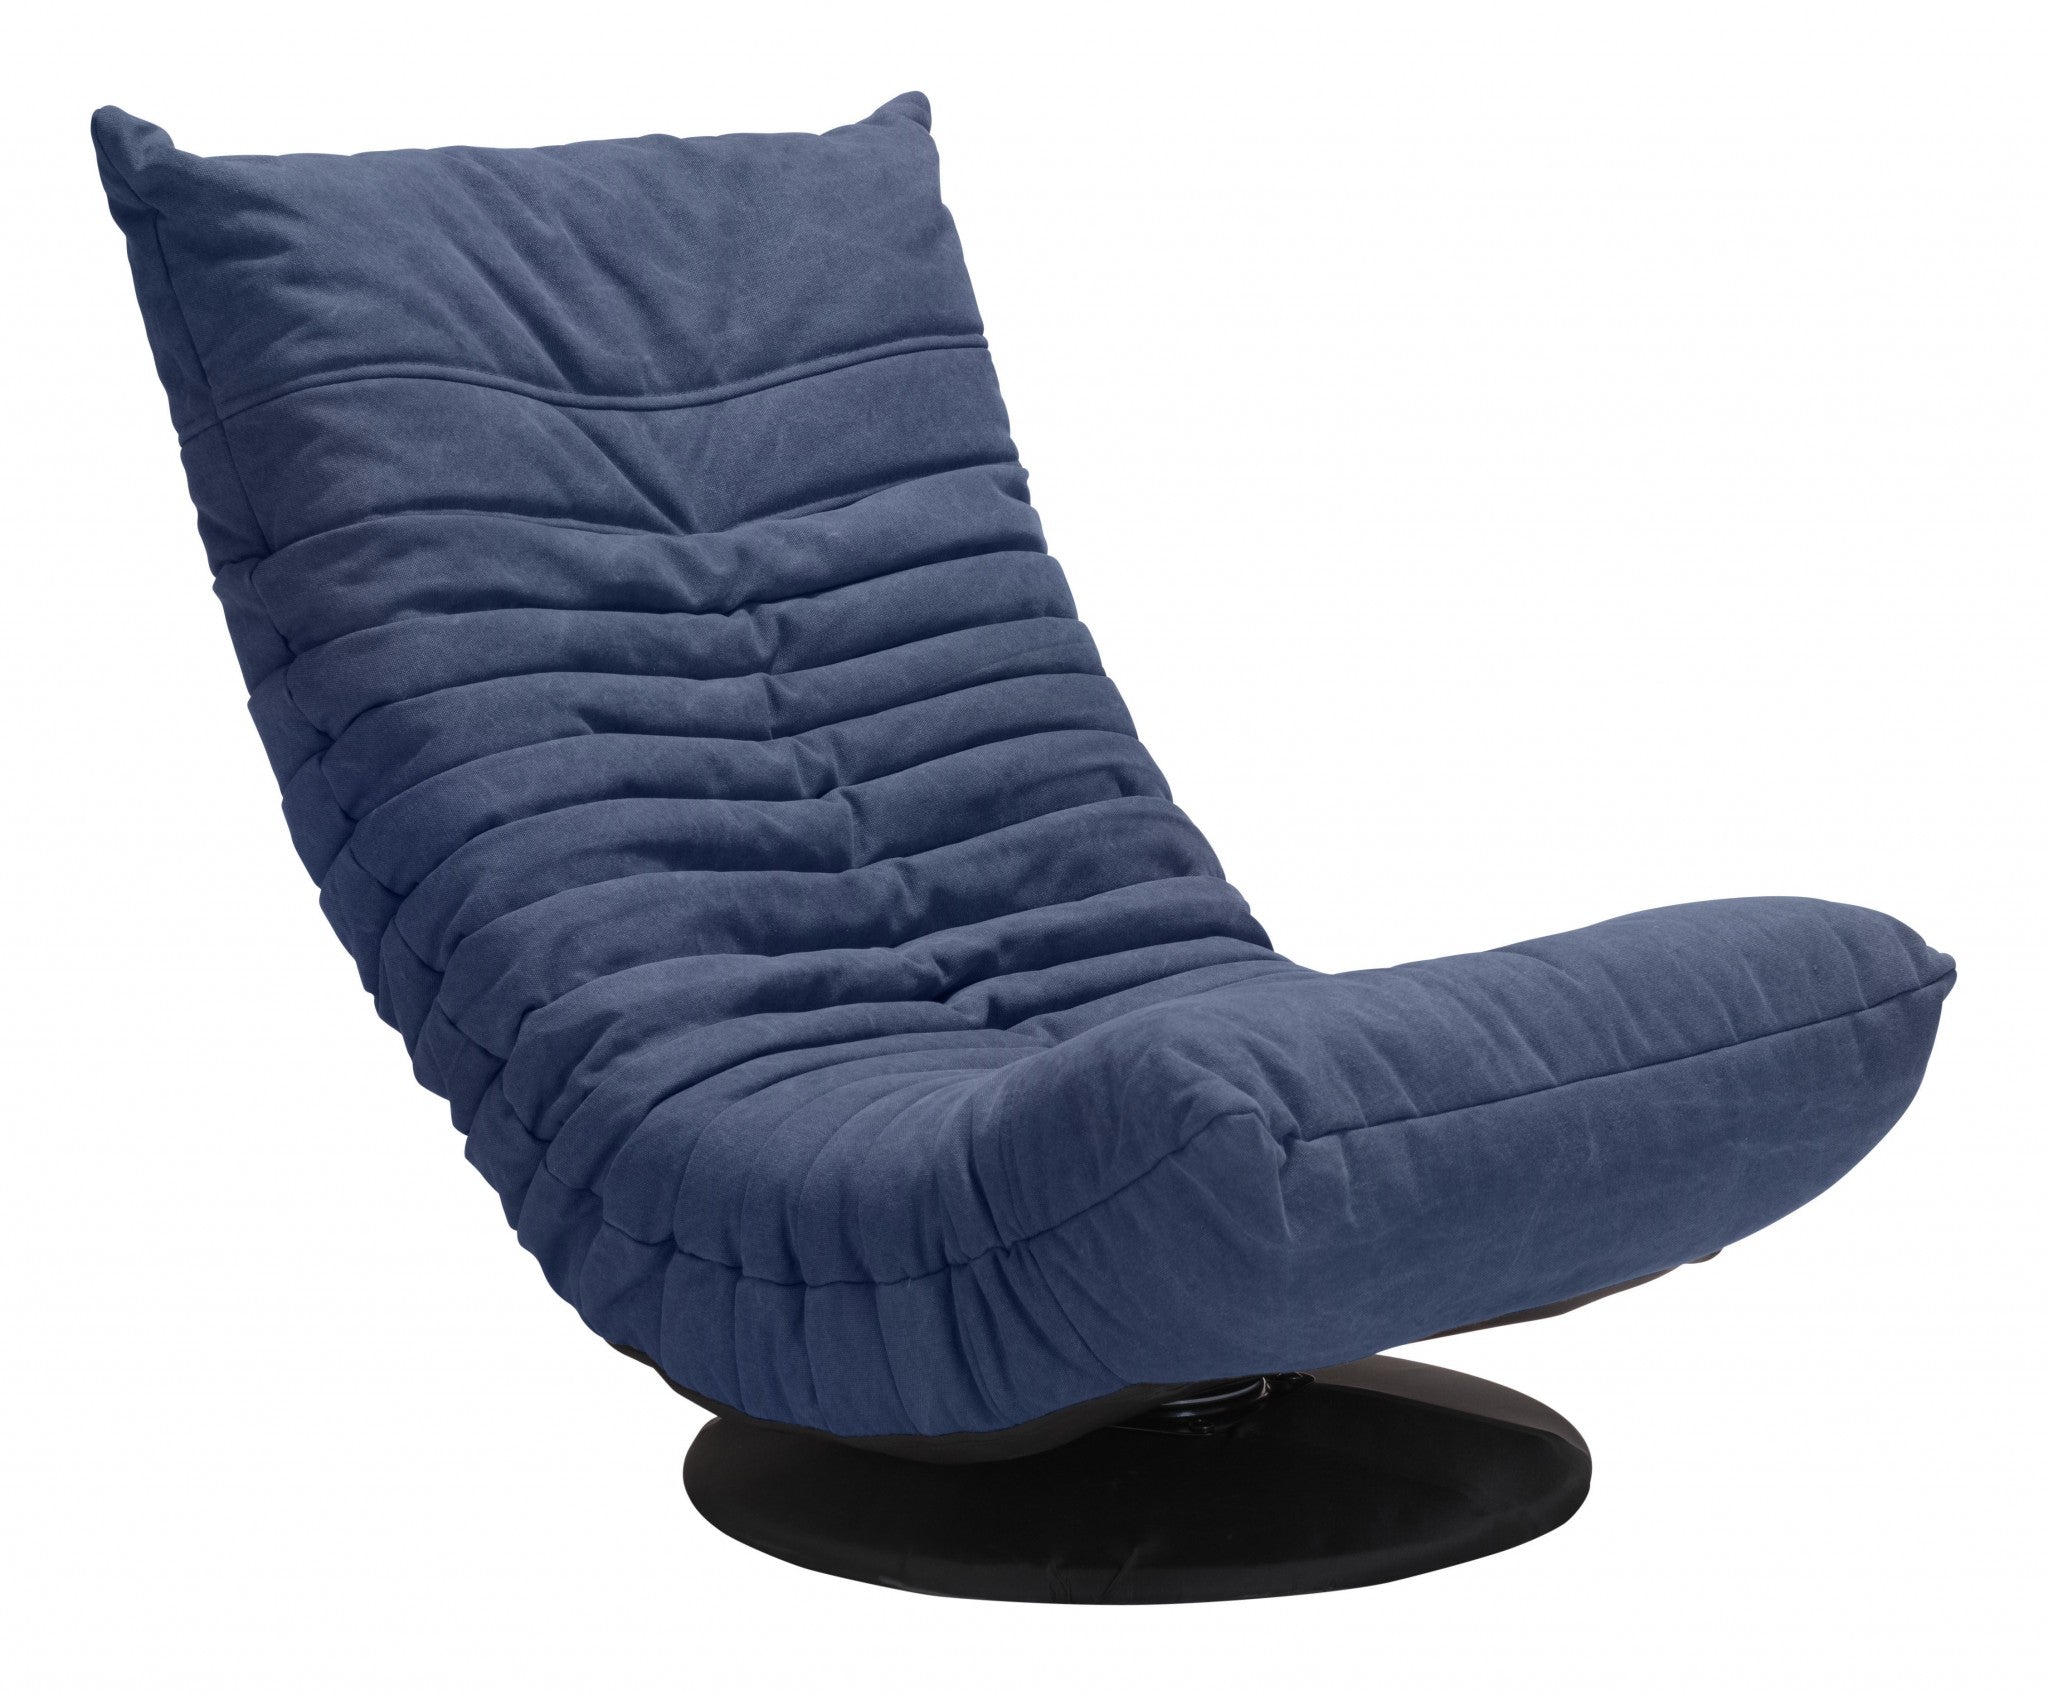 Relaxed-Low-Profile-Cobalt-Blue-Swivel-Chair-Floor-Chairs